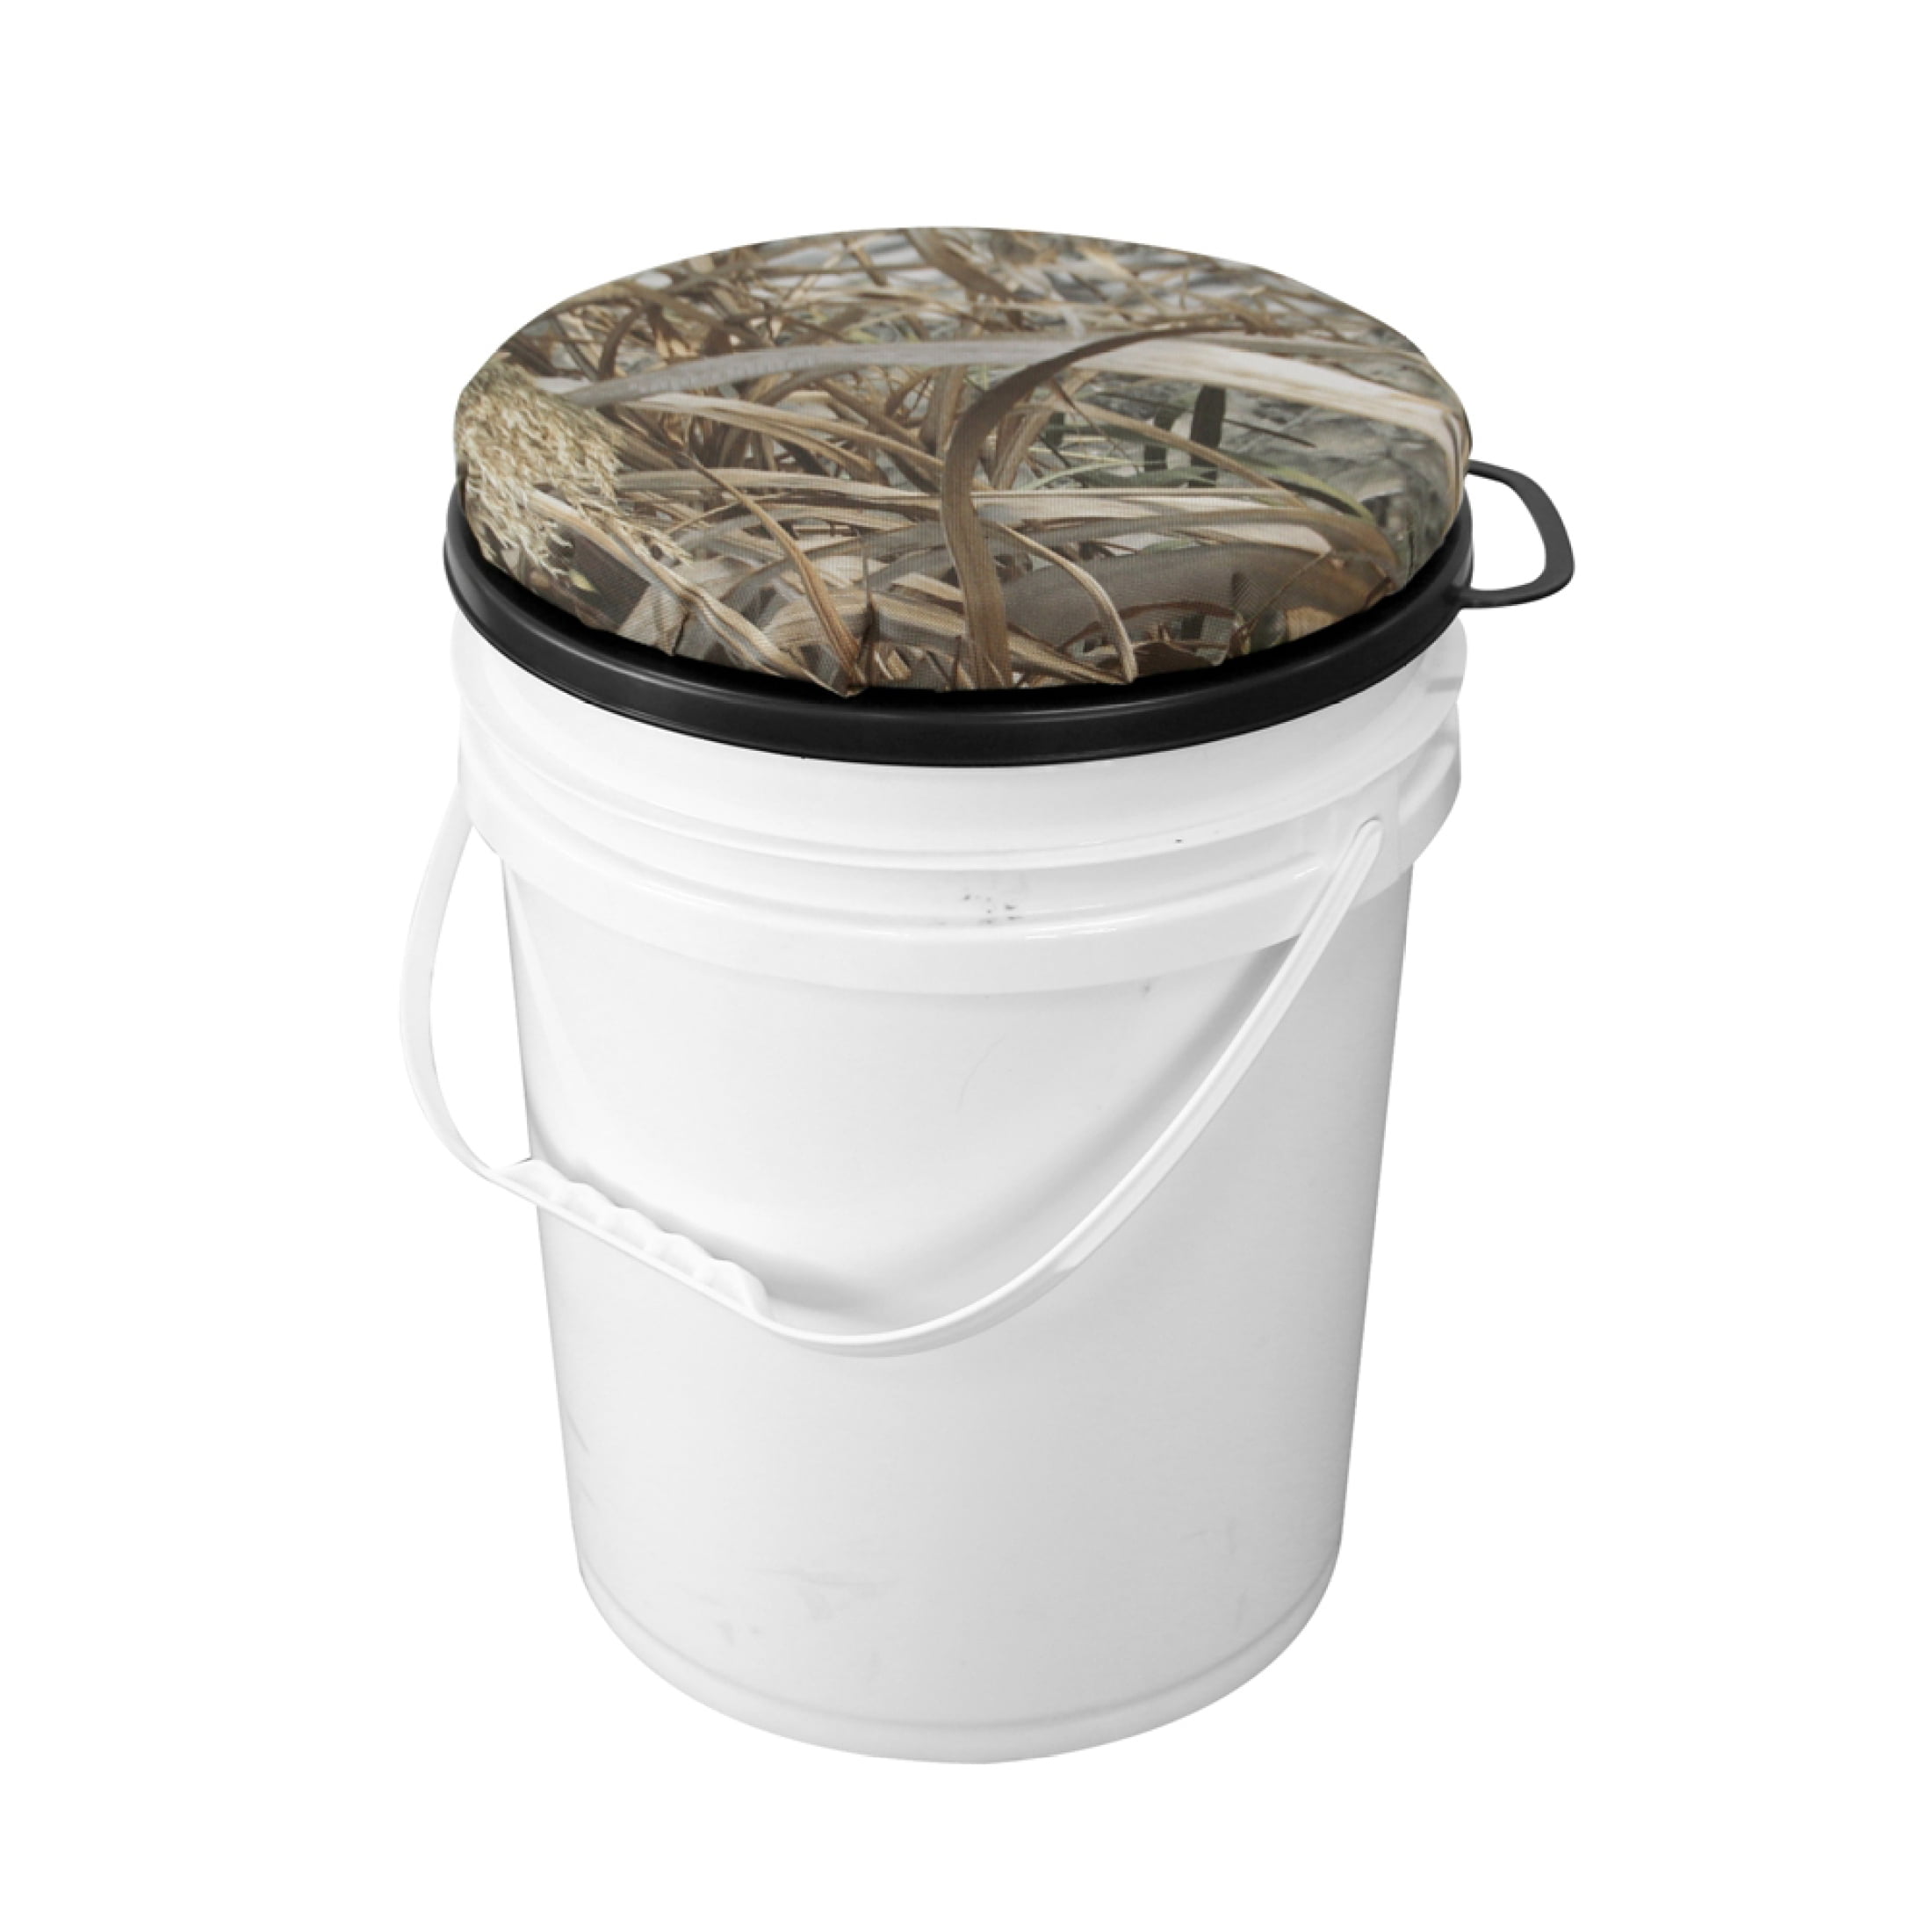 MoreChioce 5 Gallon Bucket Lid Seat Cushion Reed Camouflage